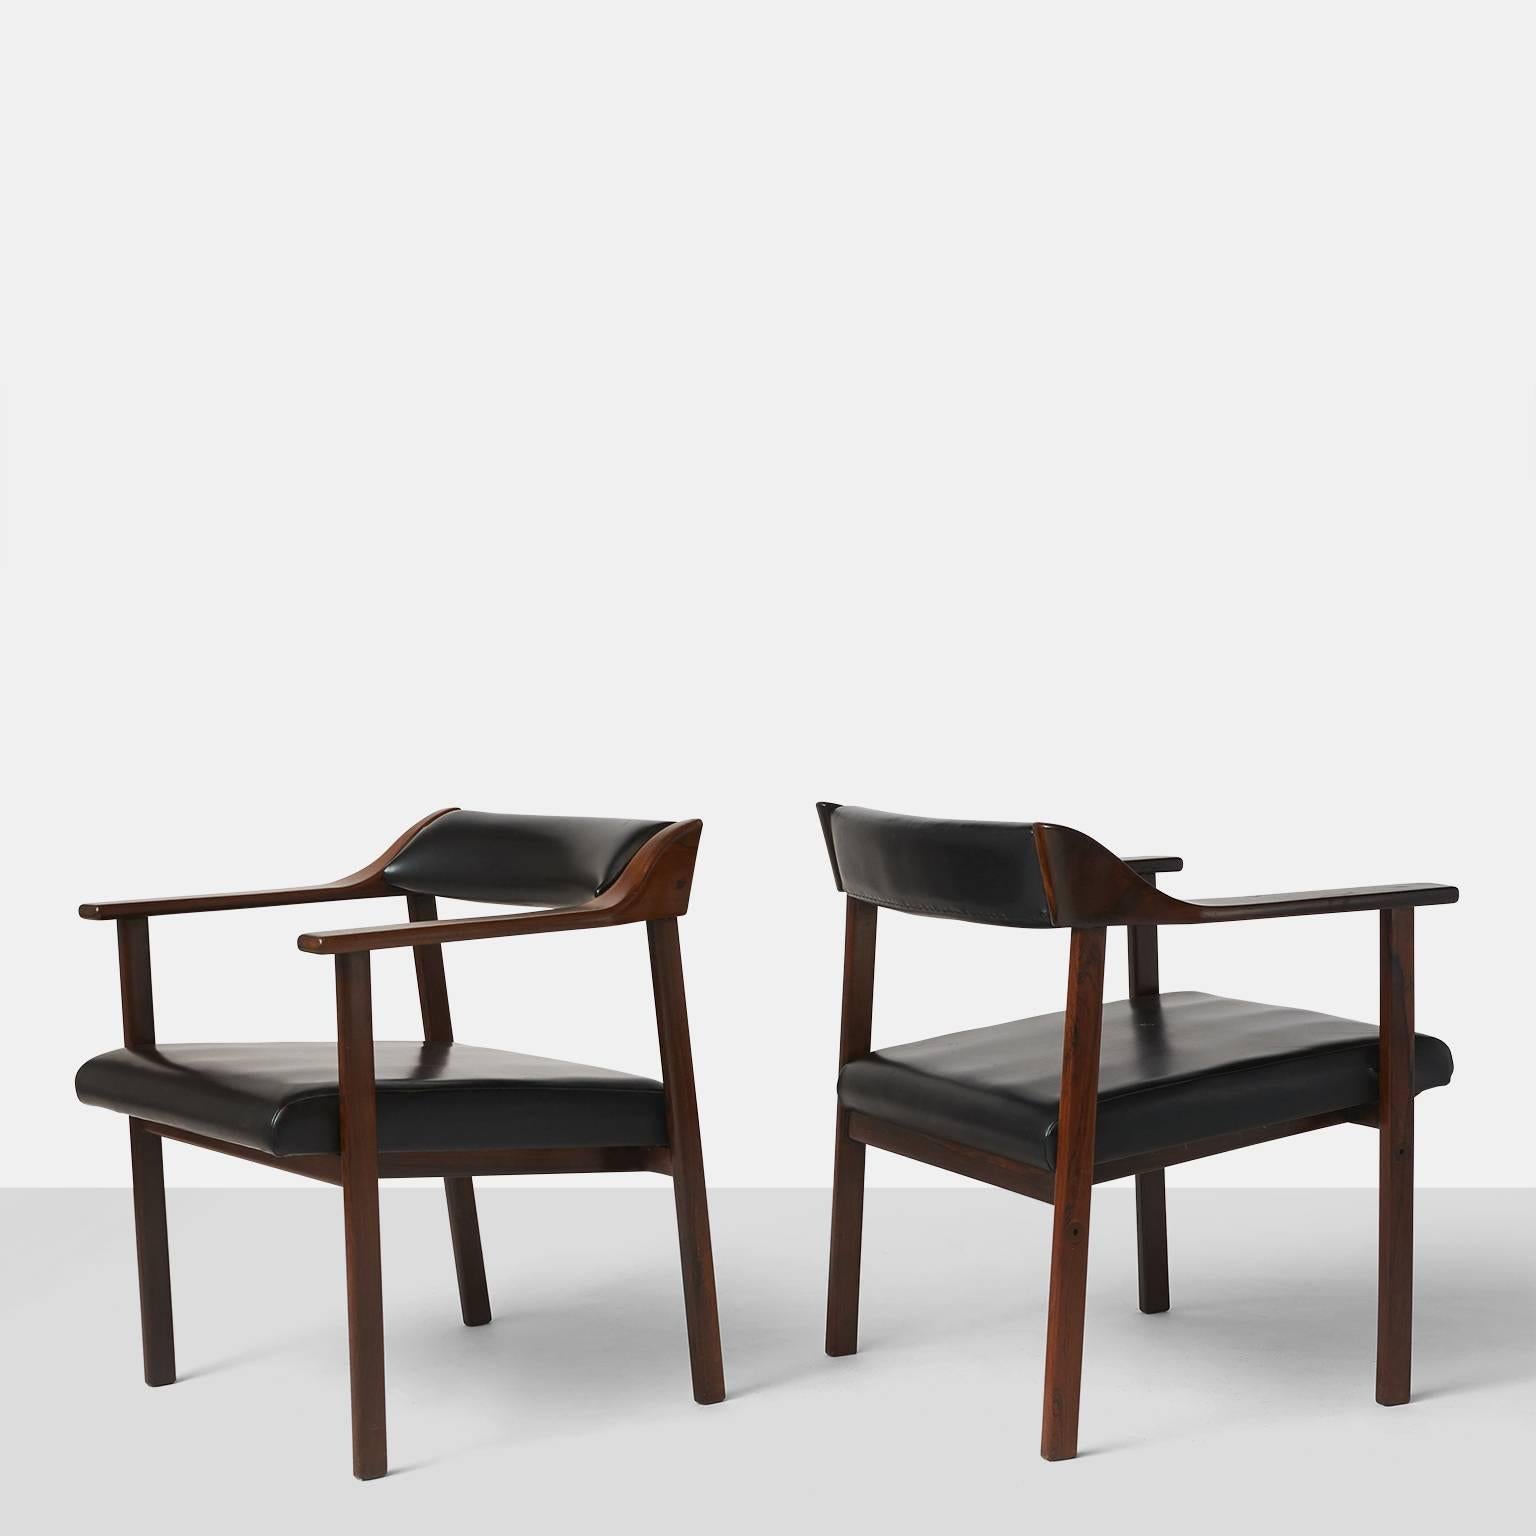 A pair of chairs in Jacaranda and upholstered in black faux leather, made in Brazil, circa 1950 by Joaquim Tenreiro. A total of four chairs are available.